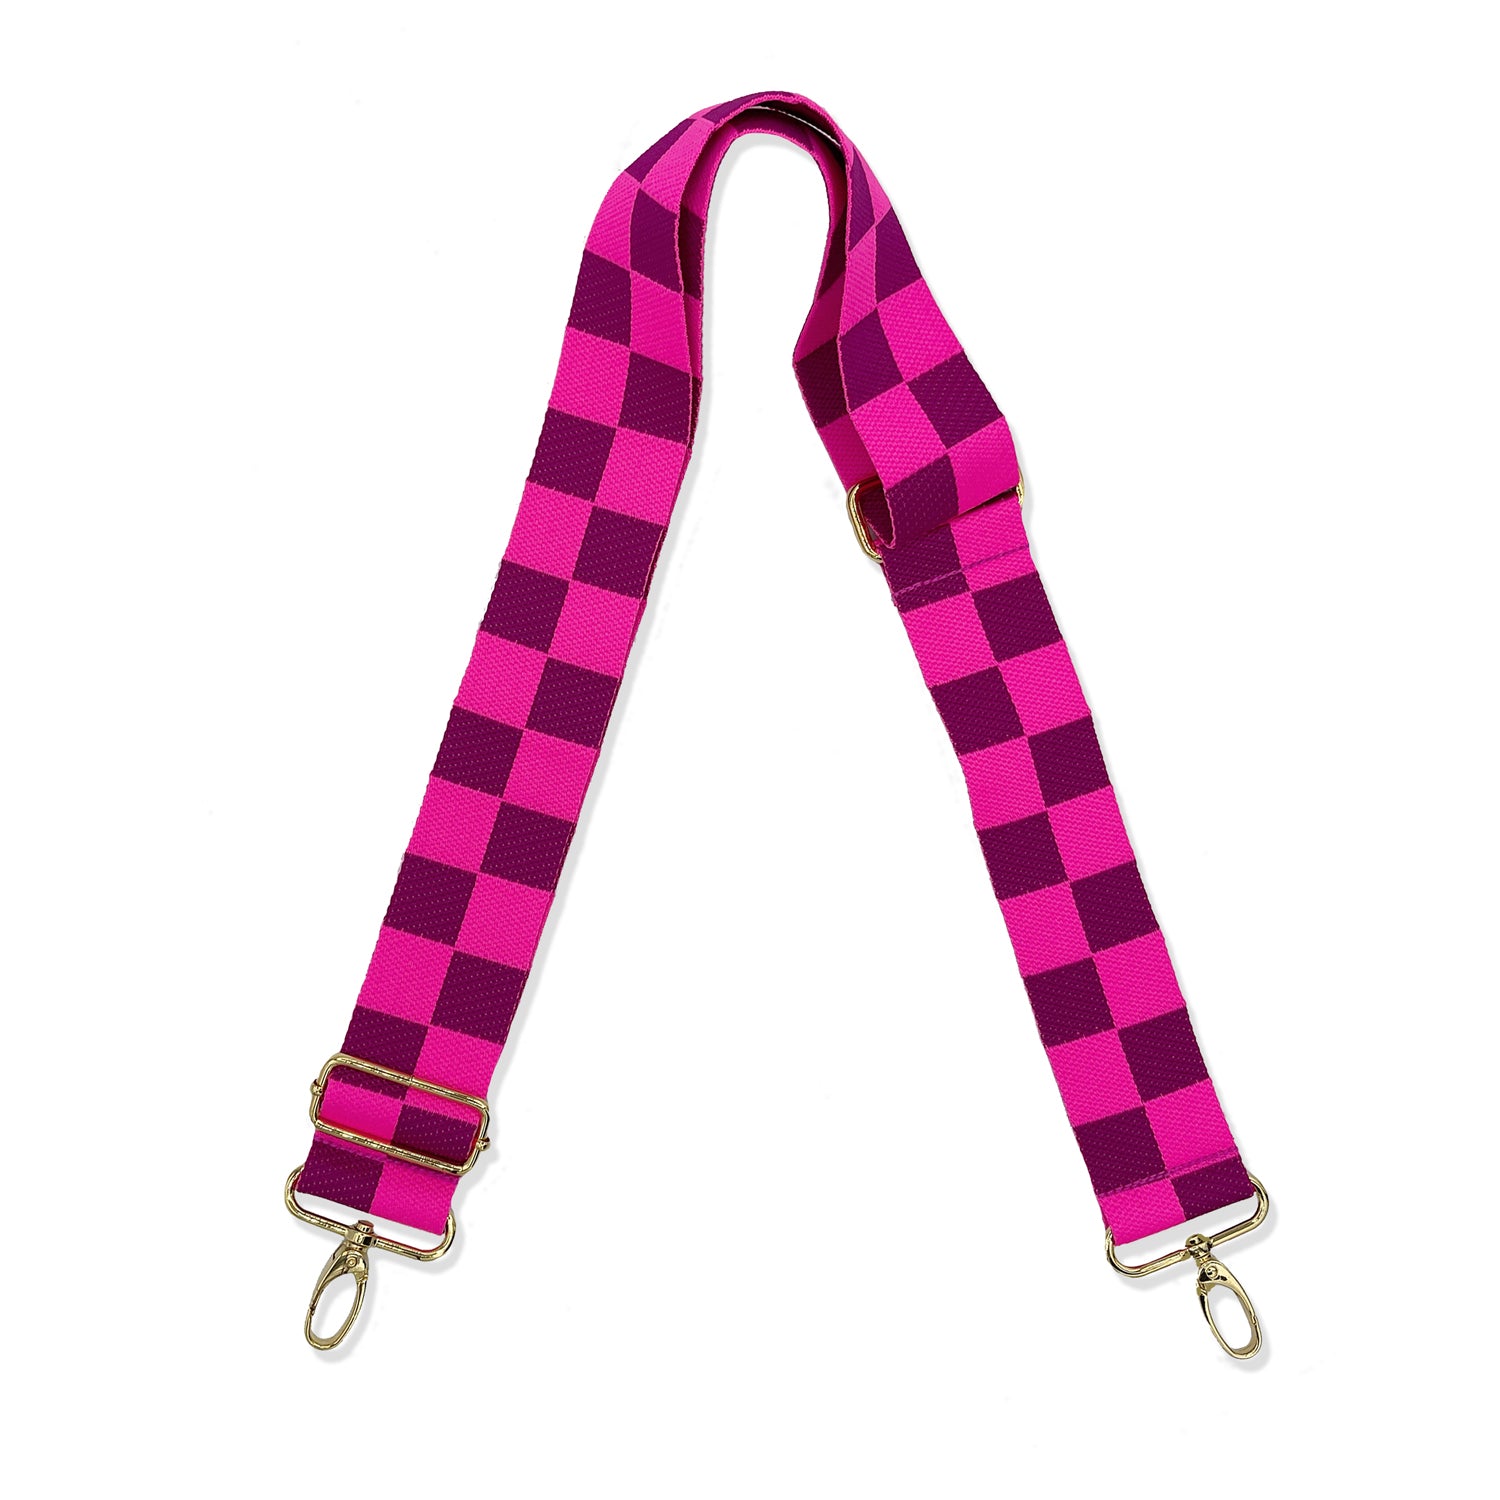 LIMITED DROP citimini sling - HOT PINK